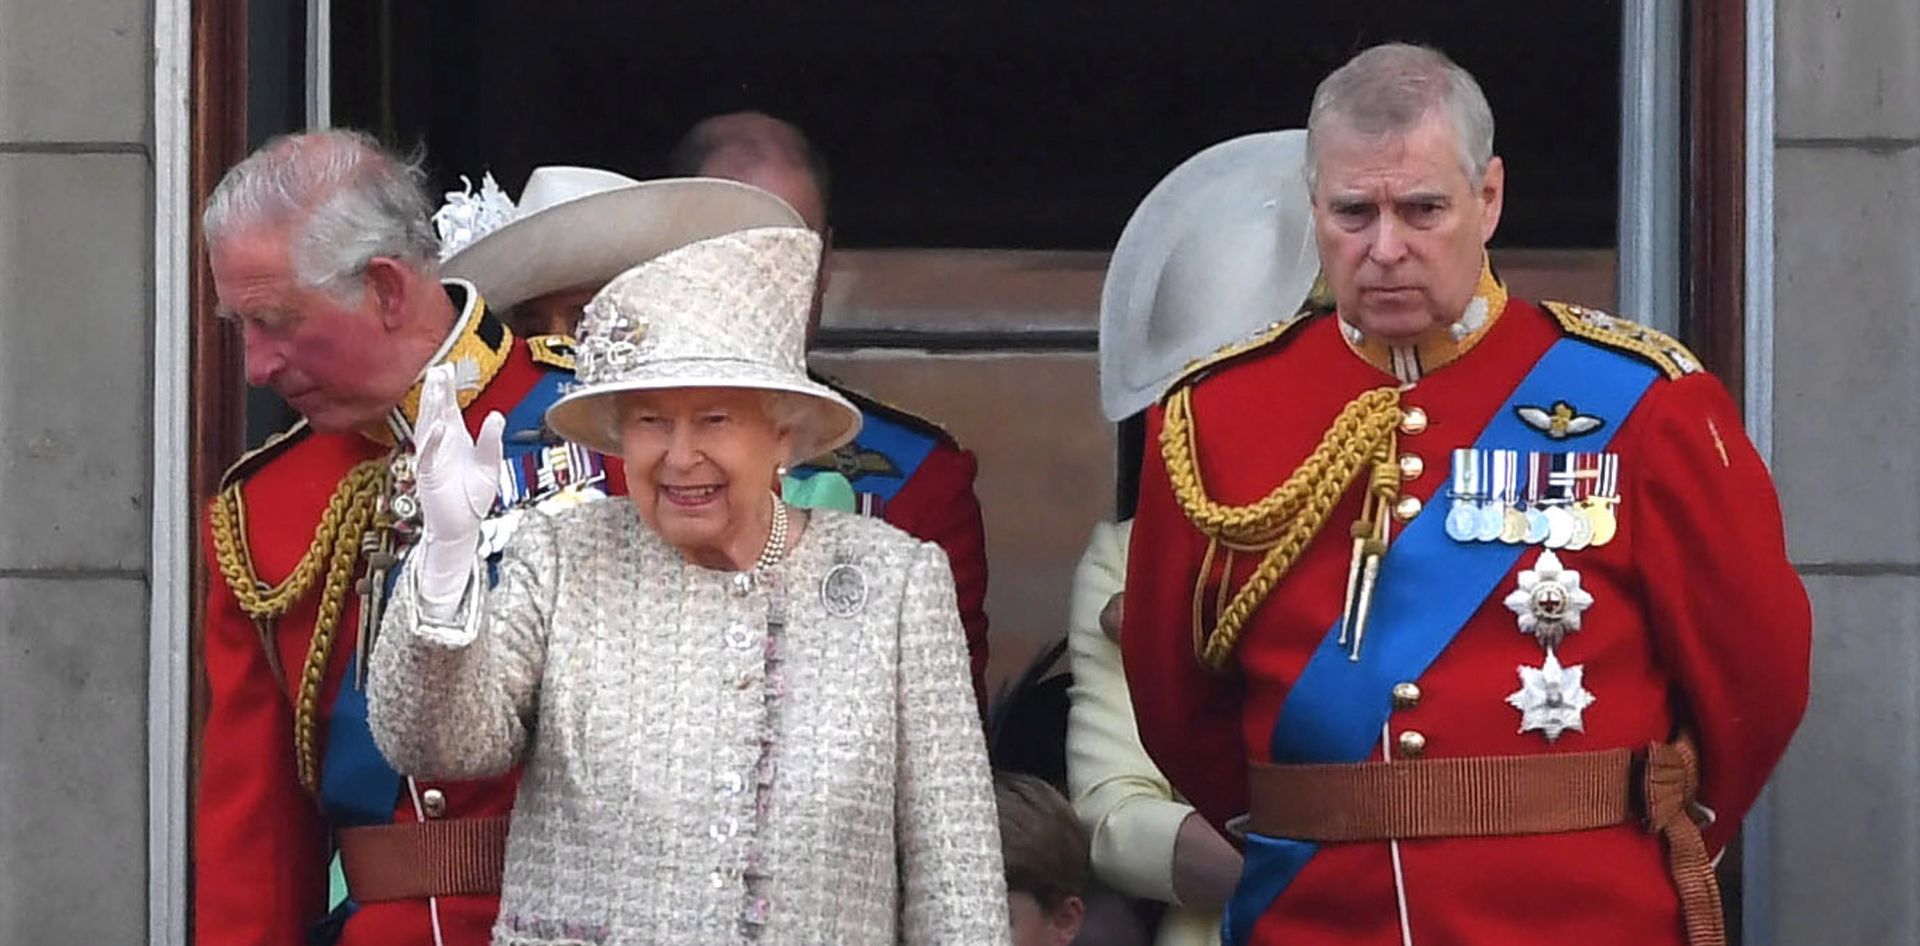 epa08012028 (FILE) - Britain's Queen Elizabeth II (L) and Prince Andrew (R) stand on the balcony of Buckingham Palace with other members of the Royal Family to watch a fly-past during the Trooping of the Colour Queen's birthday parade, in London, Britain, 08 June 2019 (reissued 20 November 2019). According to media reports on 20 November 2019, Prince Andrew, the Duke of York is stepping back from his royal duties for the 'foreseeable future' due to the Jeffrey Epstein scandal.  EPA/NEIL HALL